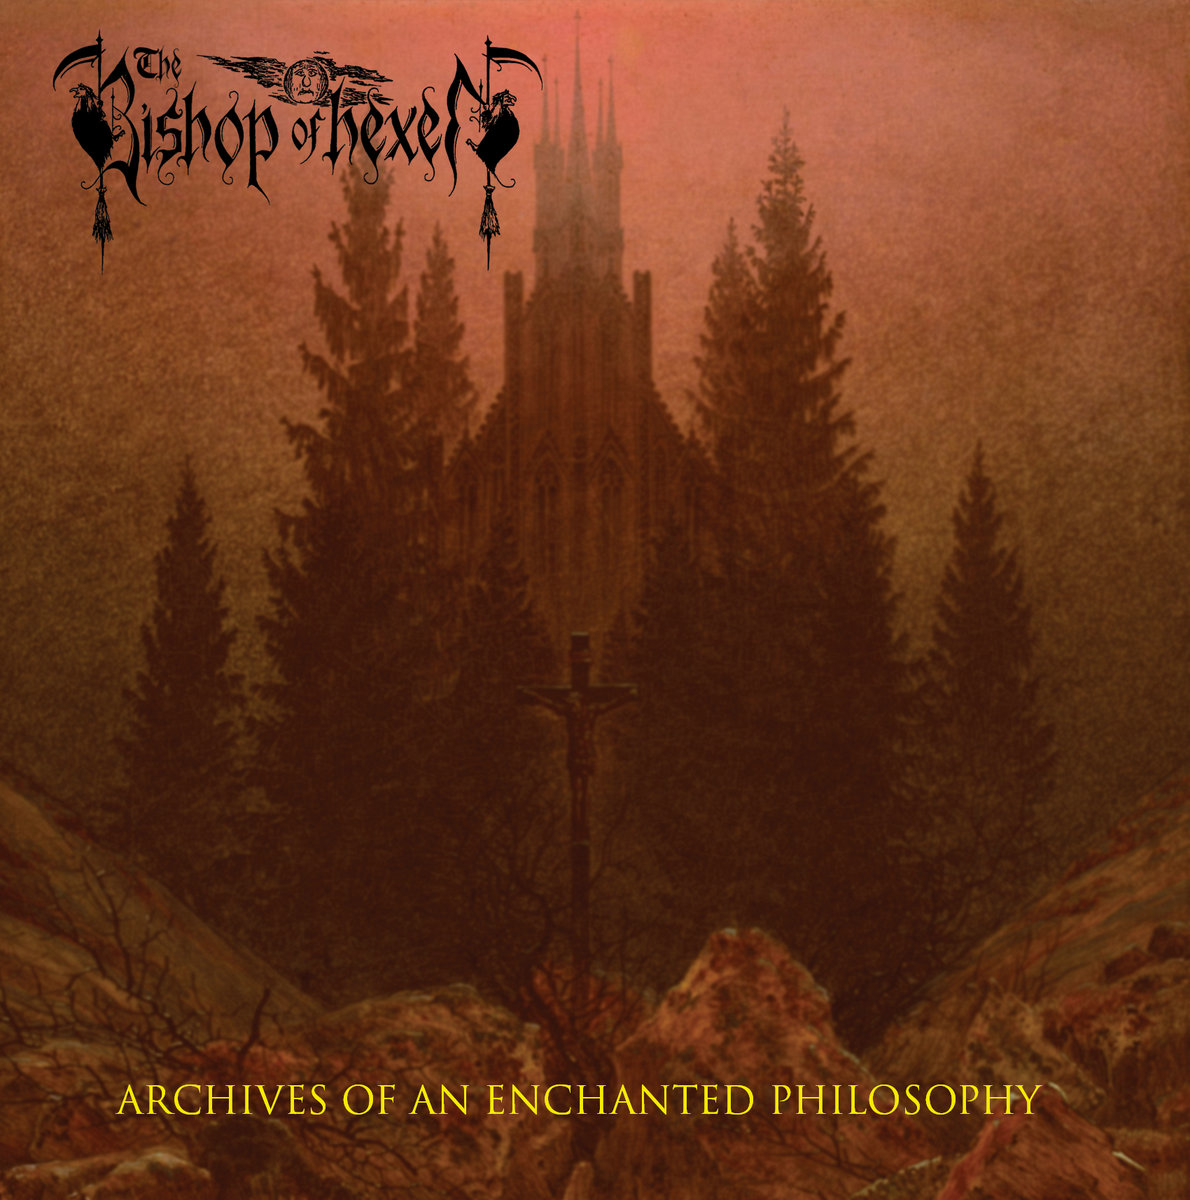 The Bishop of Hexen - Archives Of An Enchanted Philosophy  (Digipack)